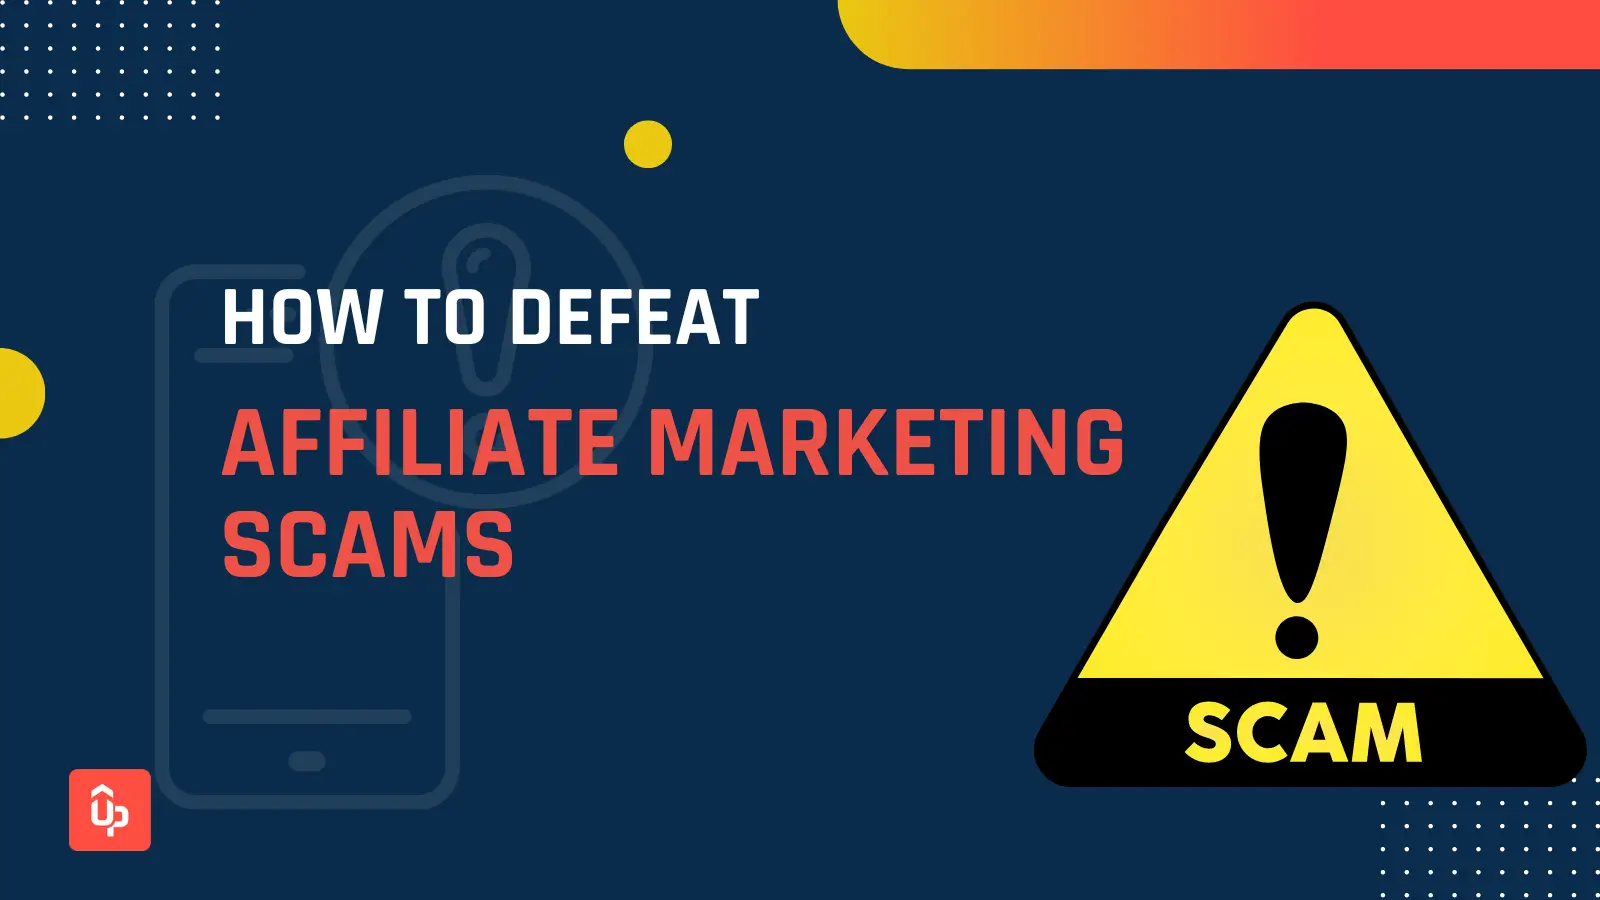 How to defeat affiliate marketing scams